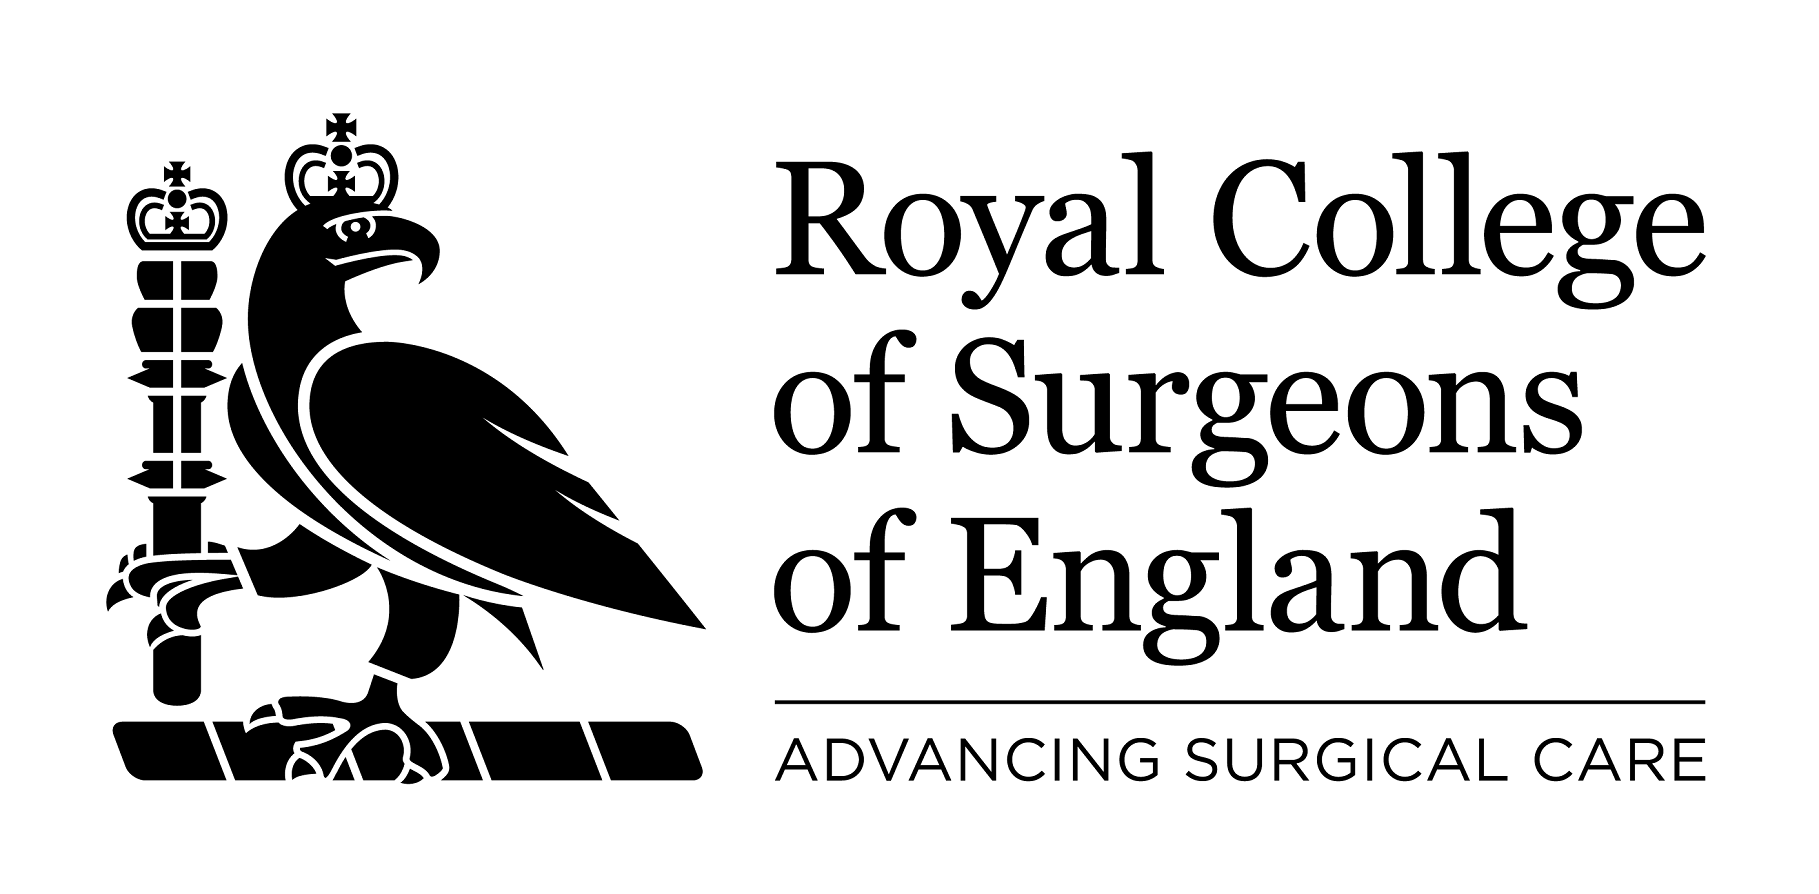 Royal College Of Surgeons of England